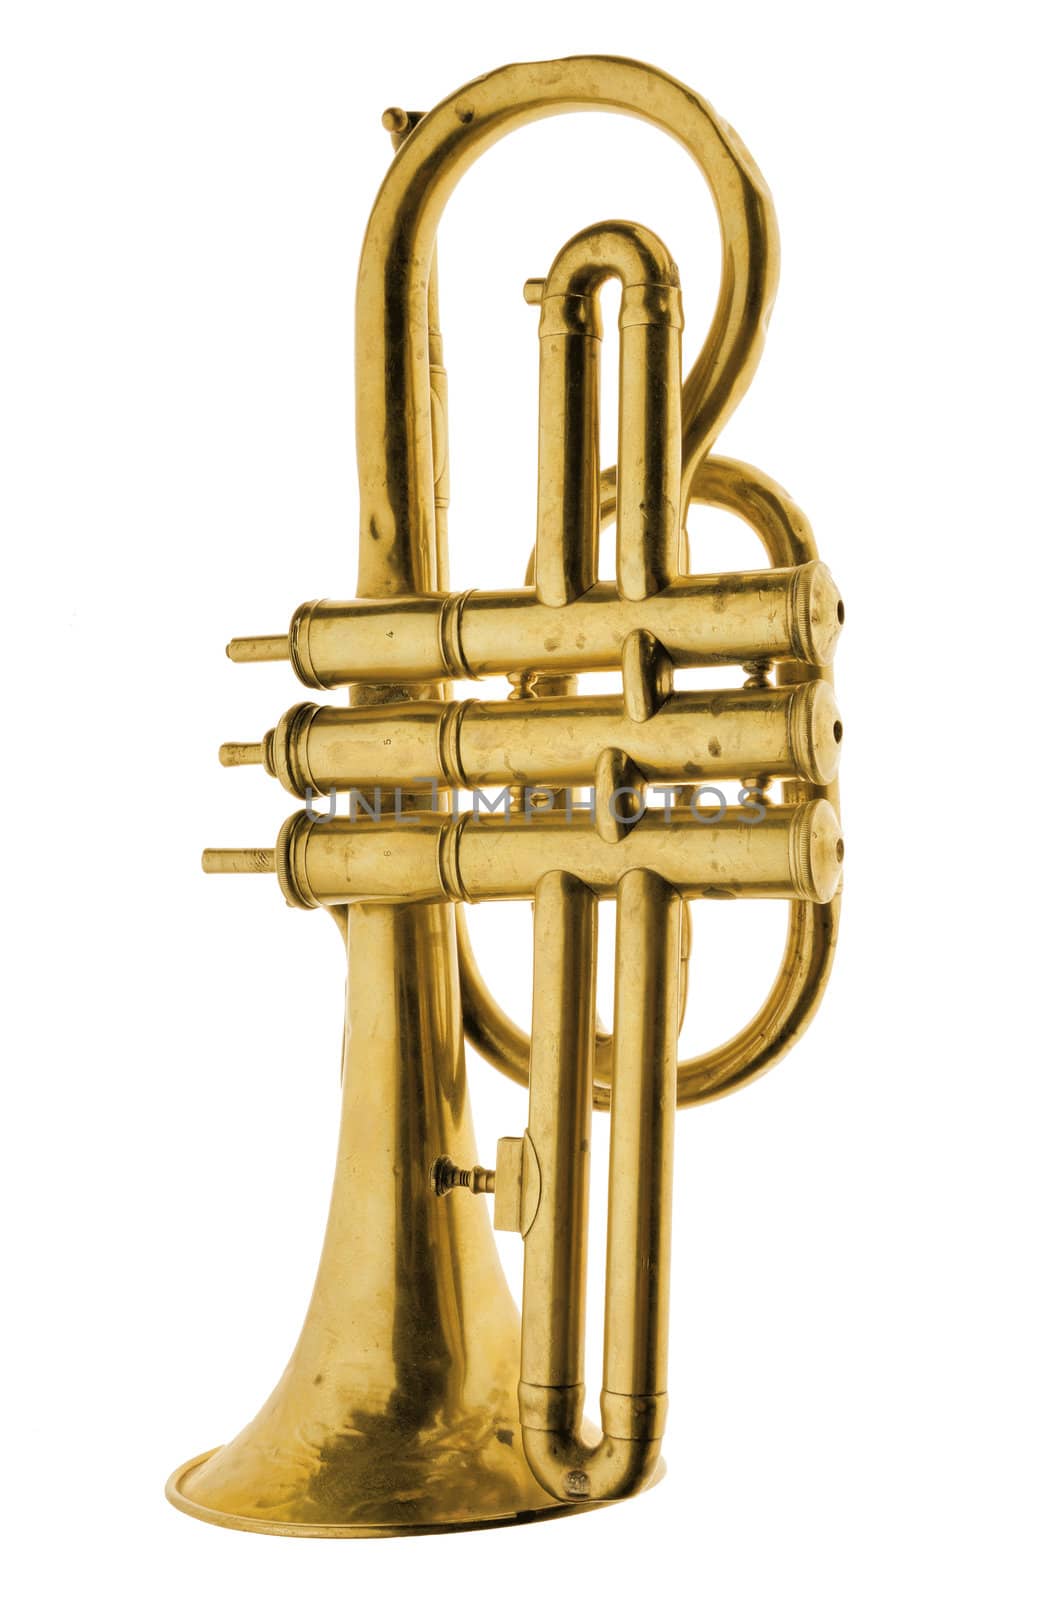 Old gold trumpet vintage isolated white background